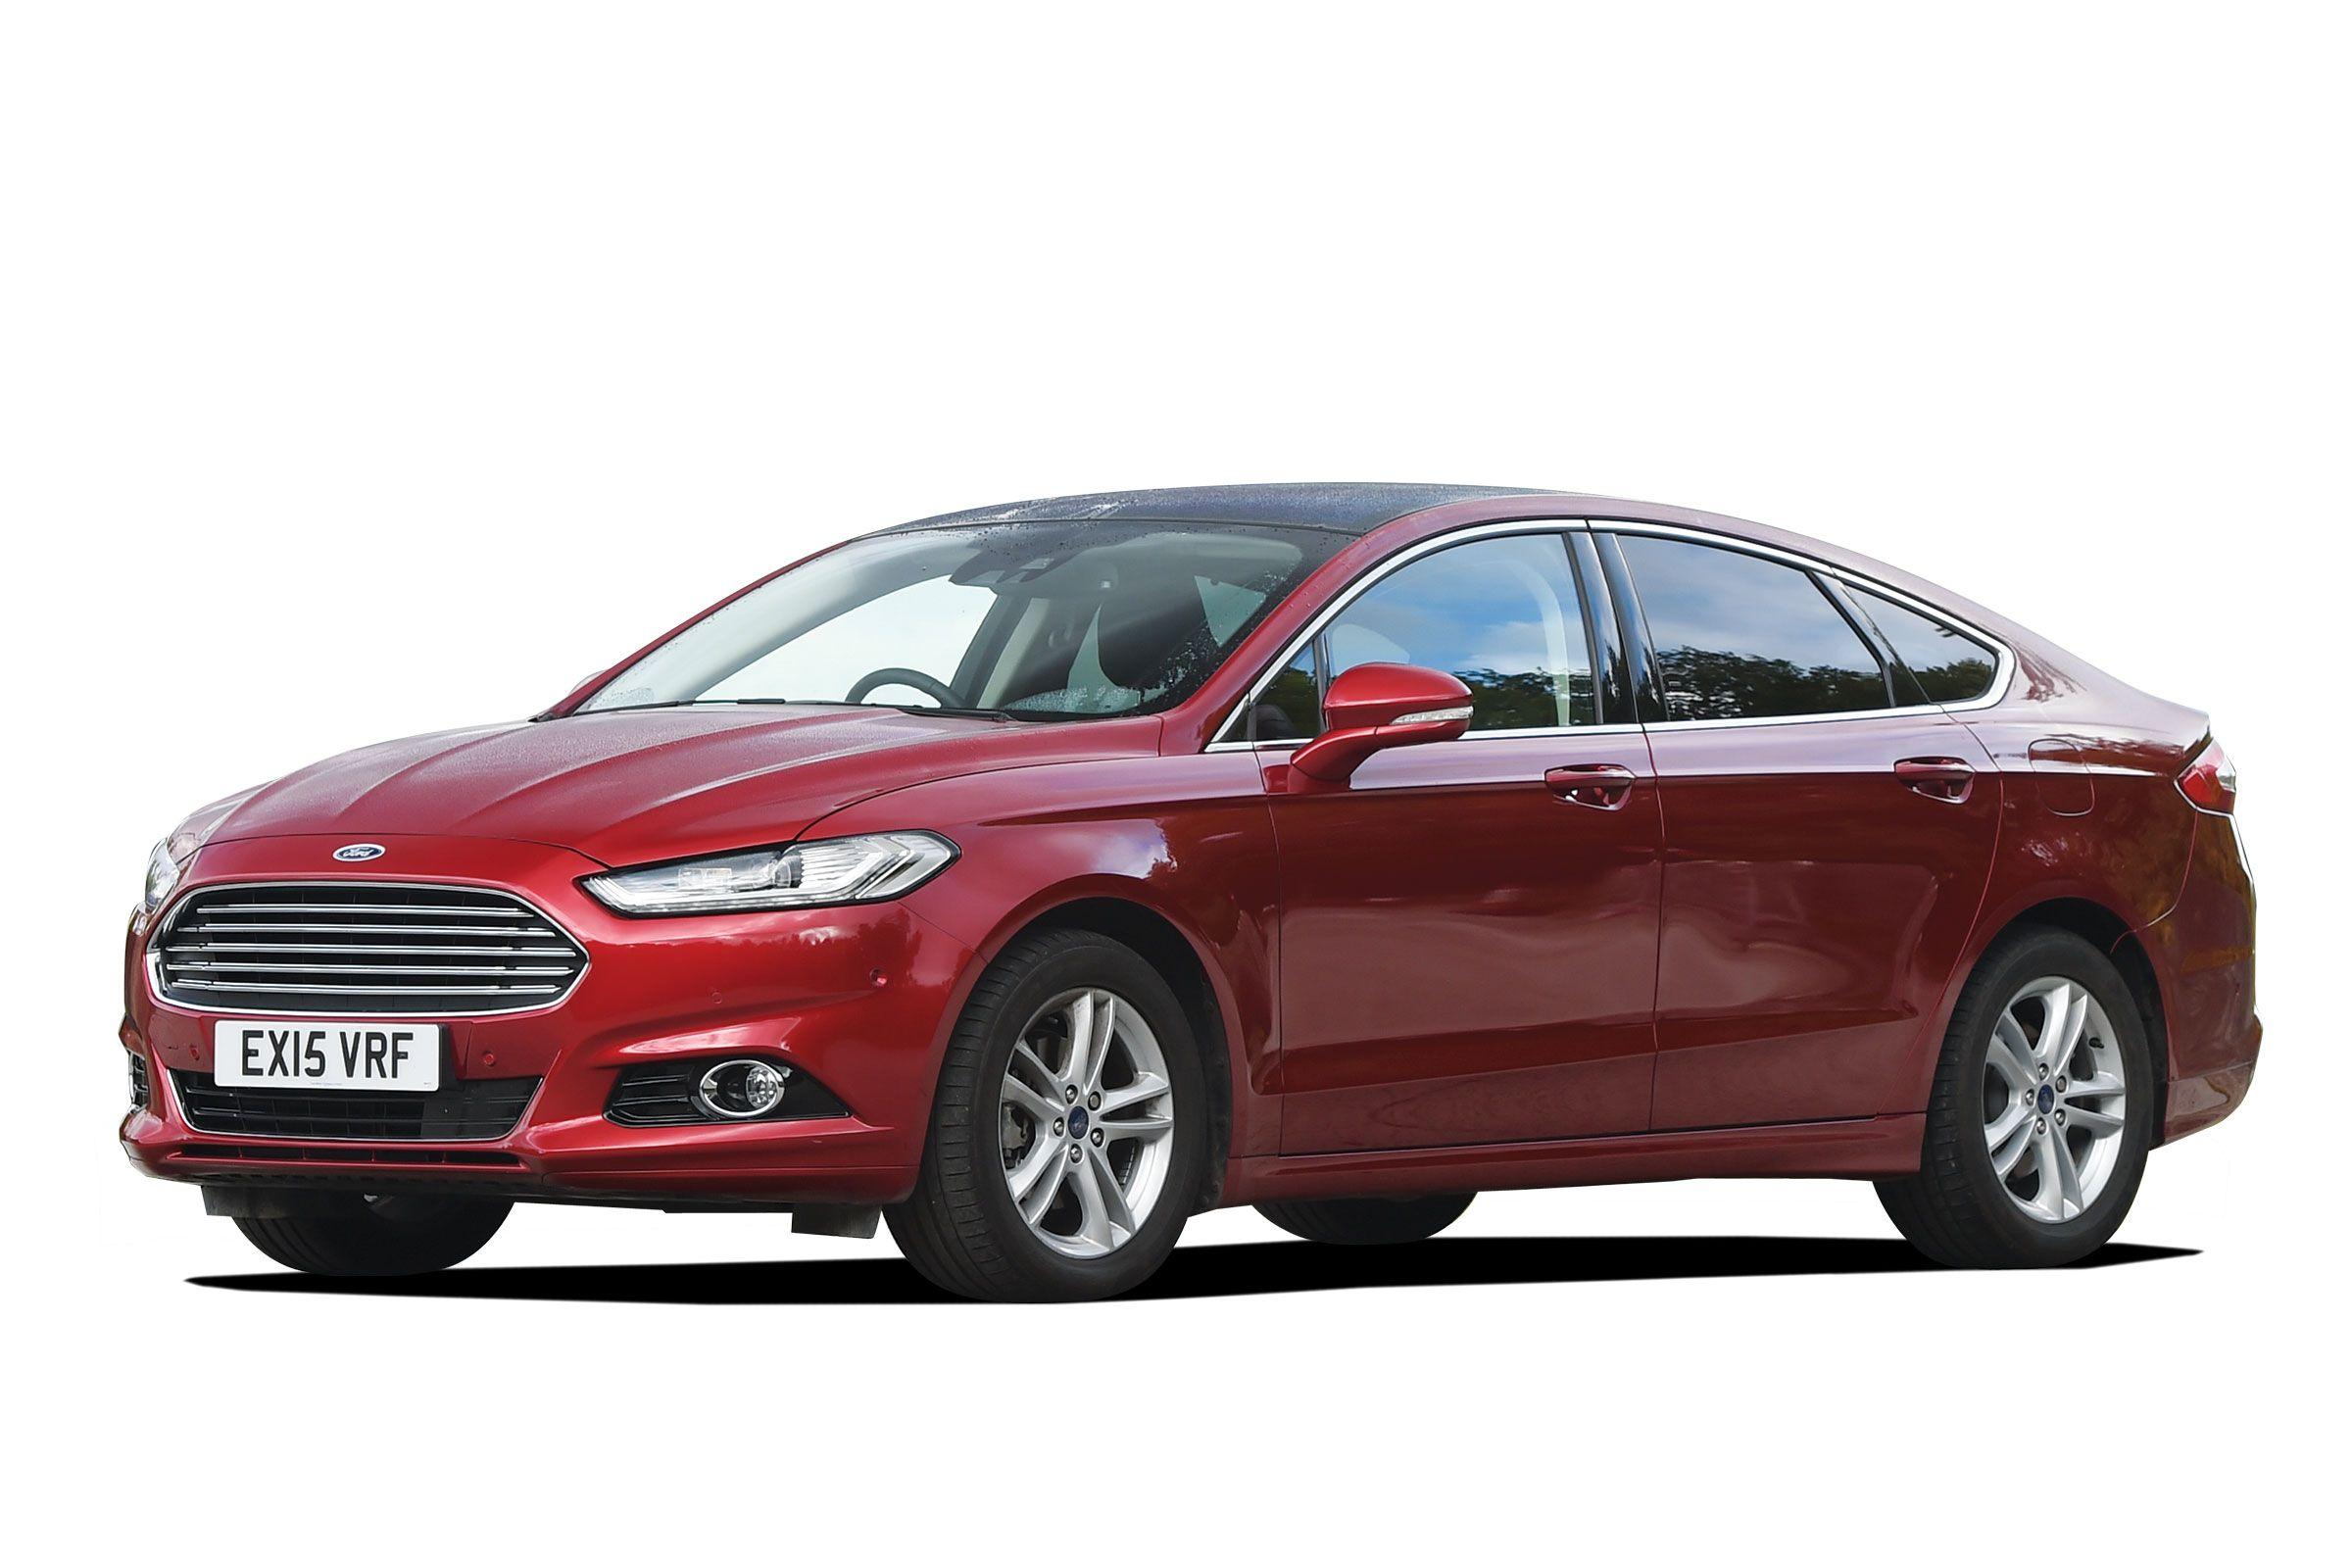 Mondeo 2014. Ford Mondeo 5. Ford Mondeo 2015. Форд Мондео 5 2015. Ford Mondeo mk5.